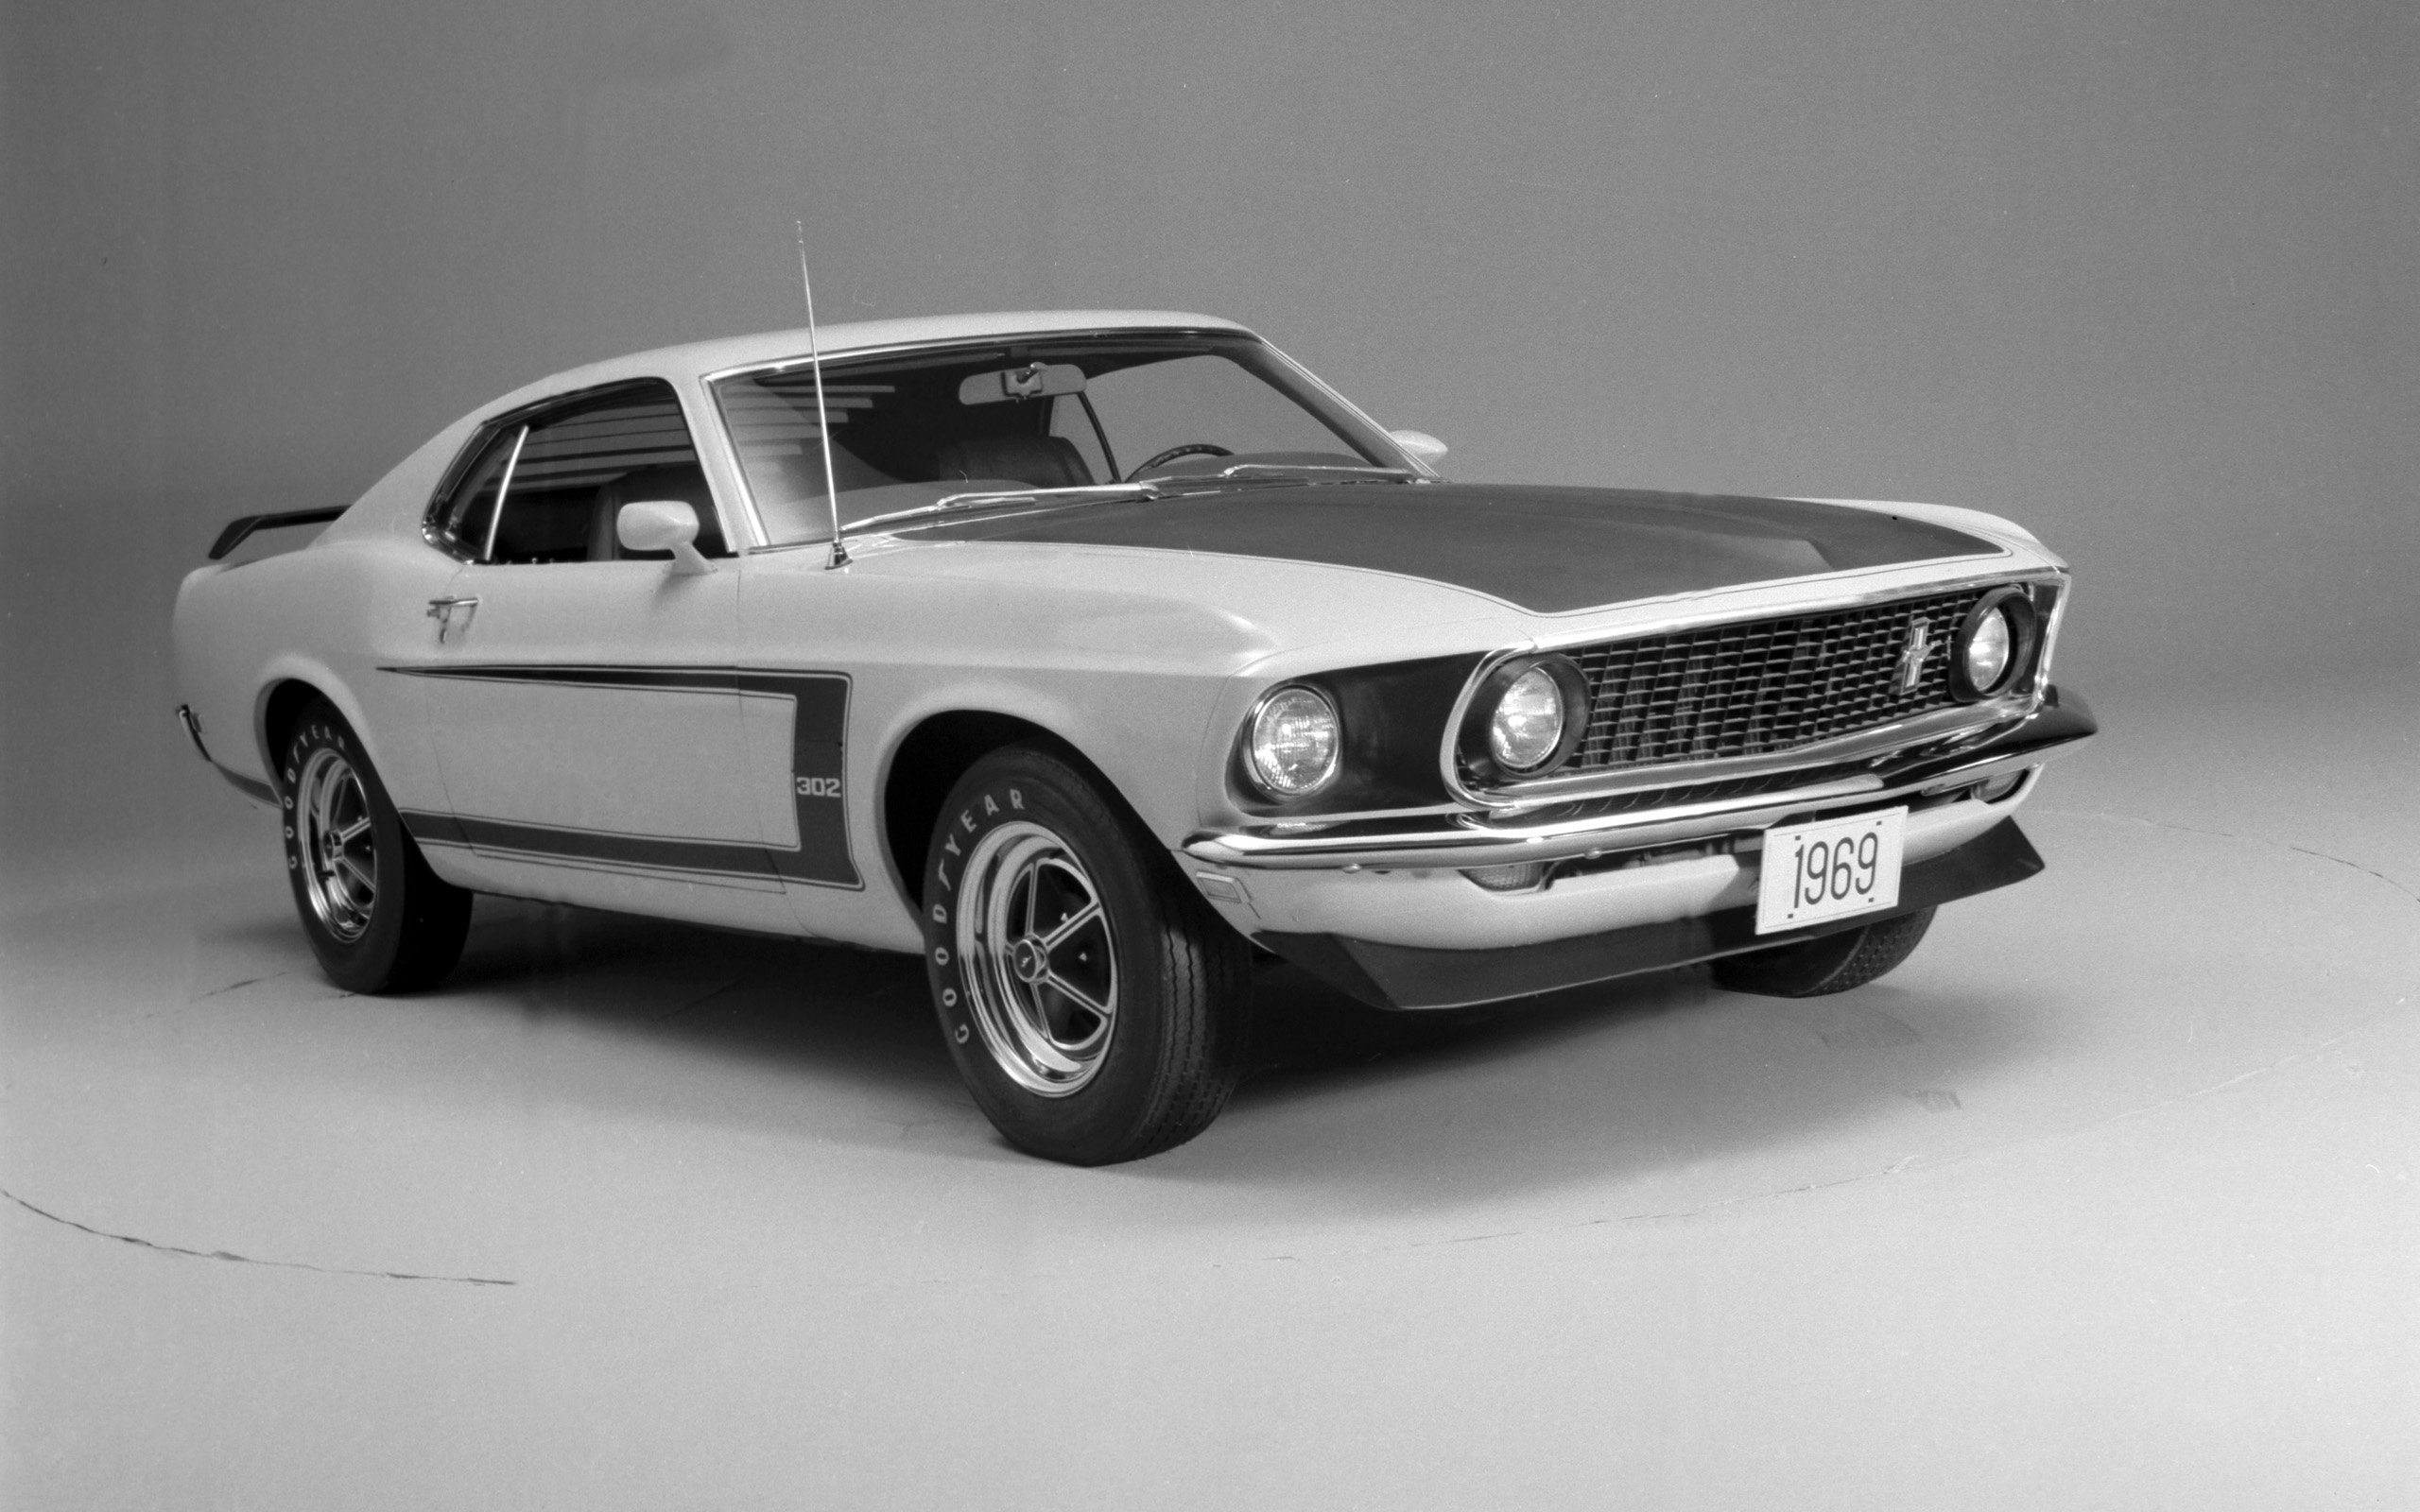 Black Amp White Car Fastback Ford Mustang Boss 302 Muscle Car 2560x1600